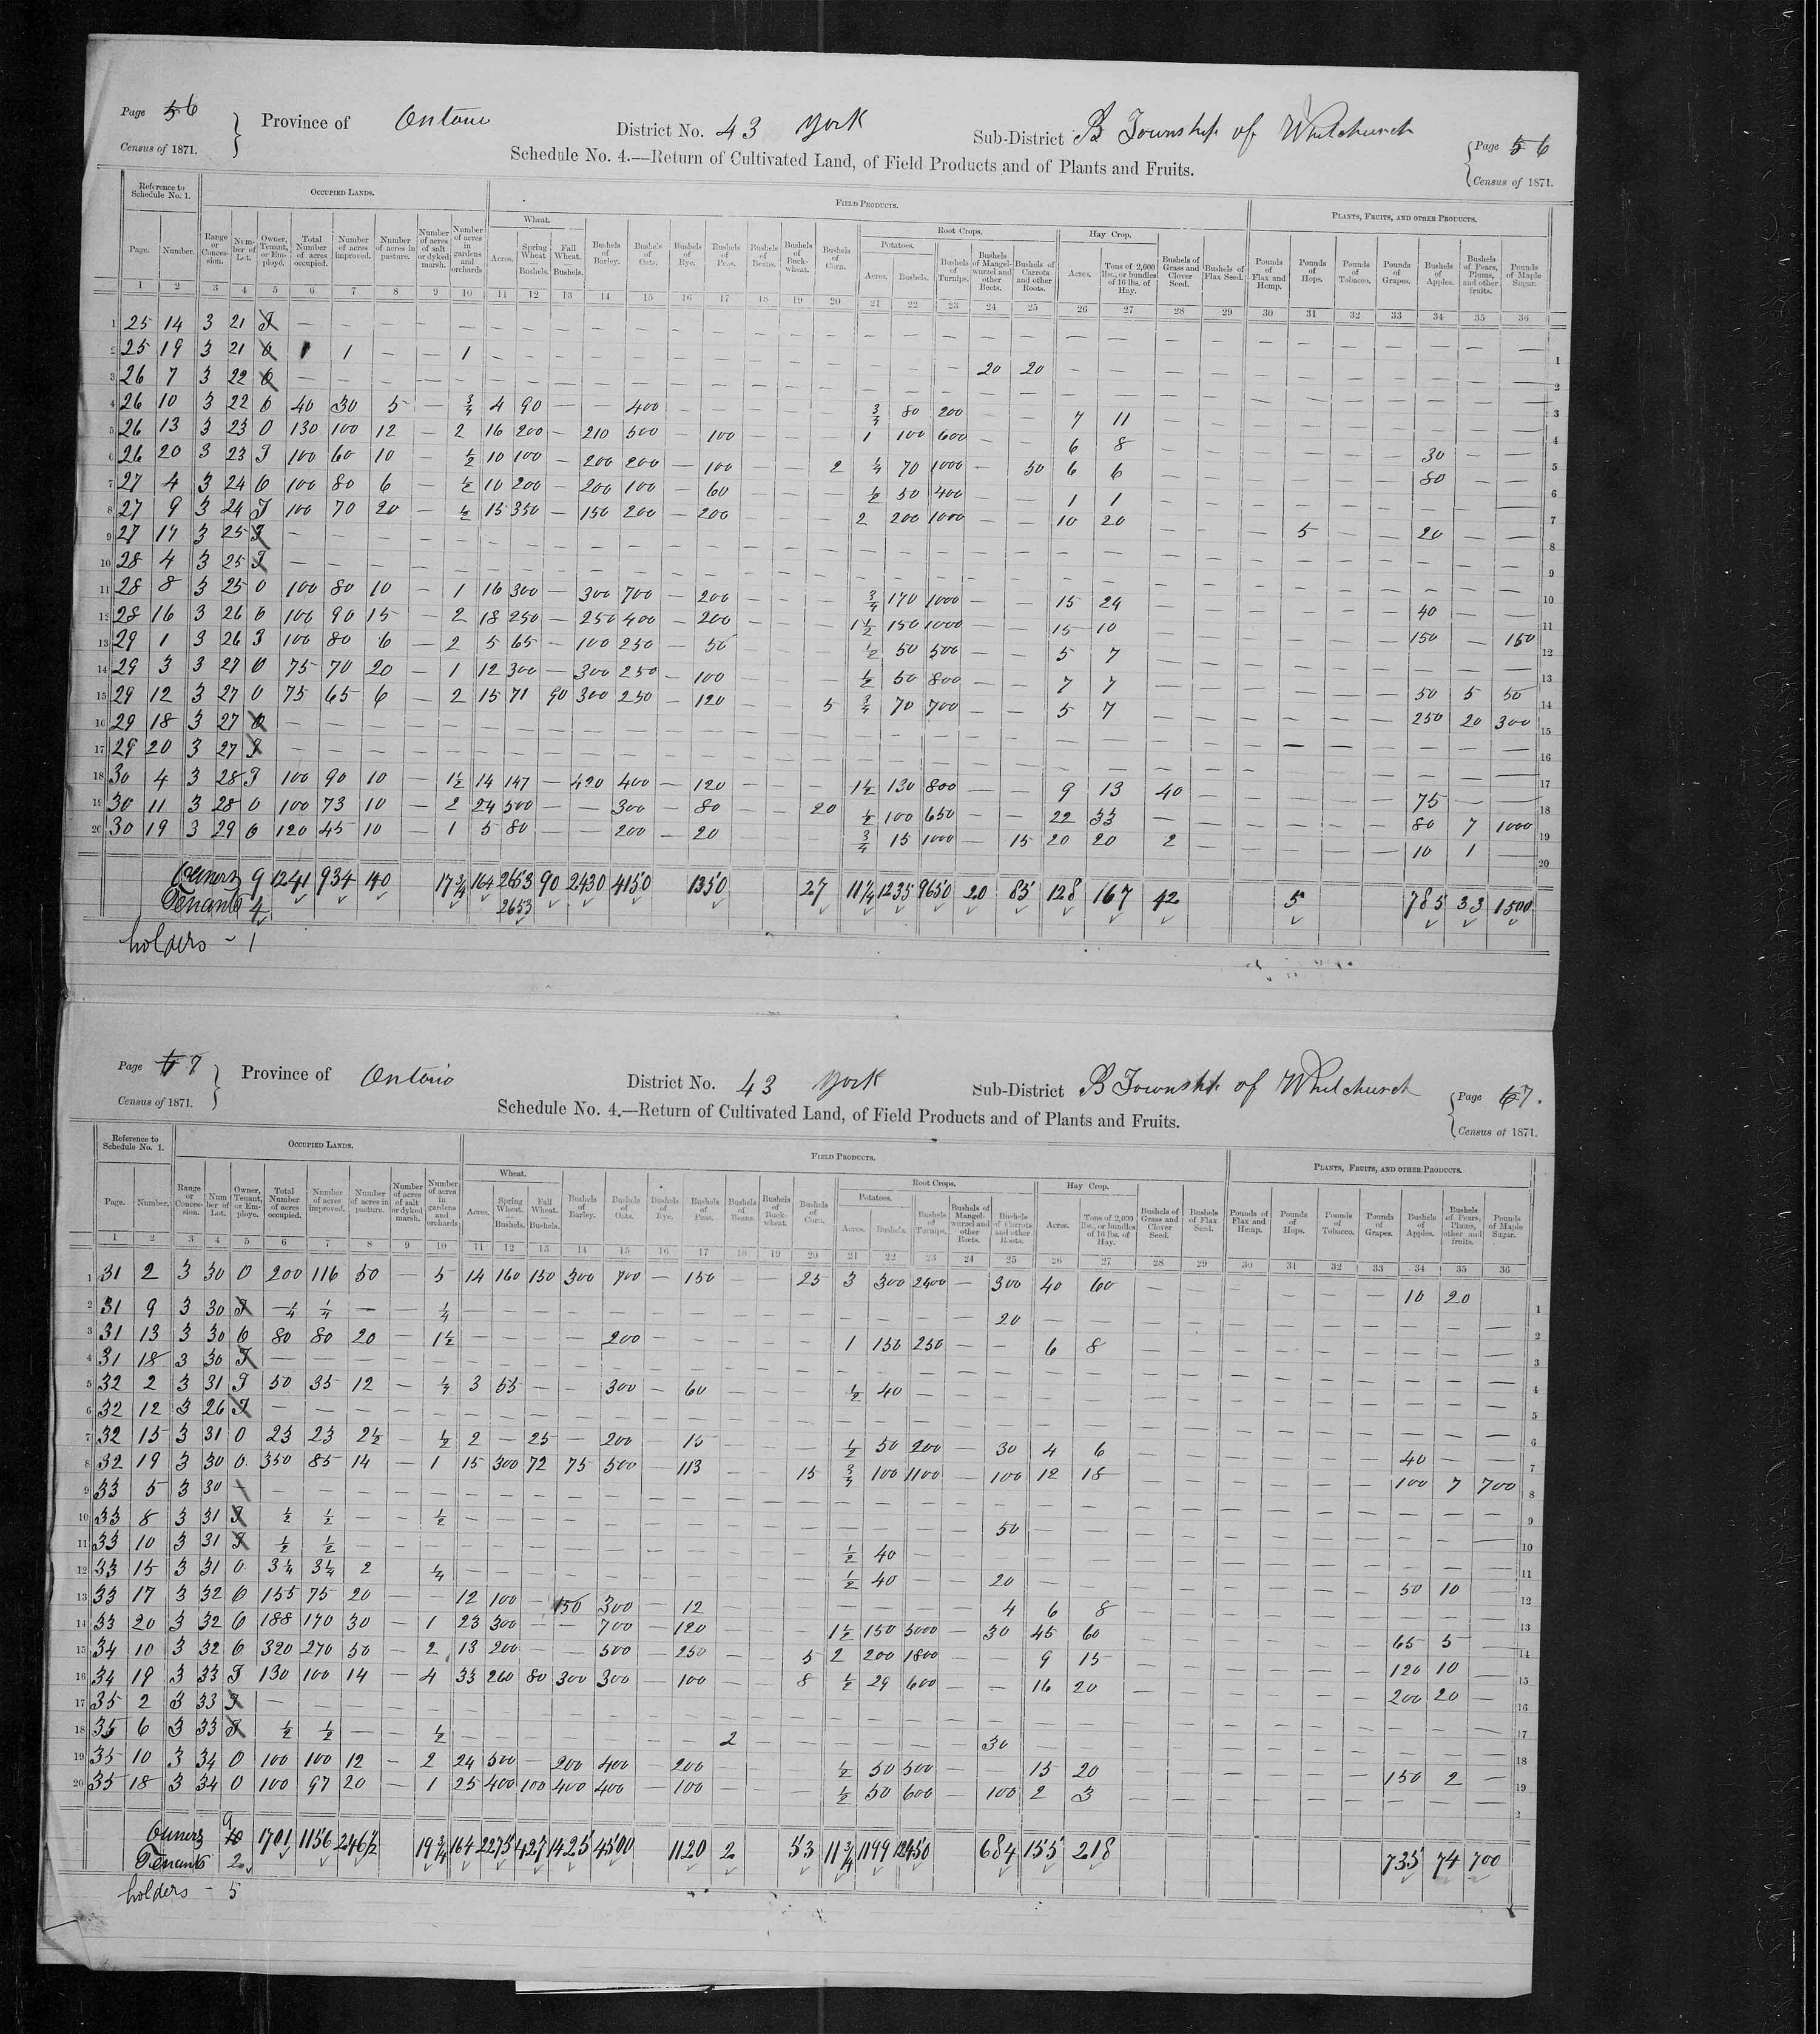 Title: Census of Canada, 1871 - Mikan Number: 142105 - Microform: c-9965